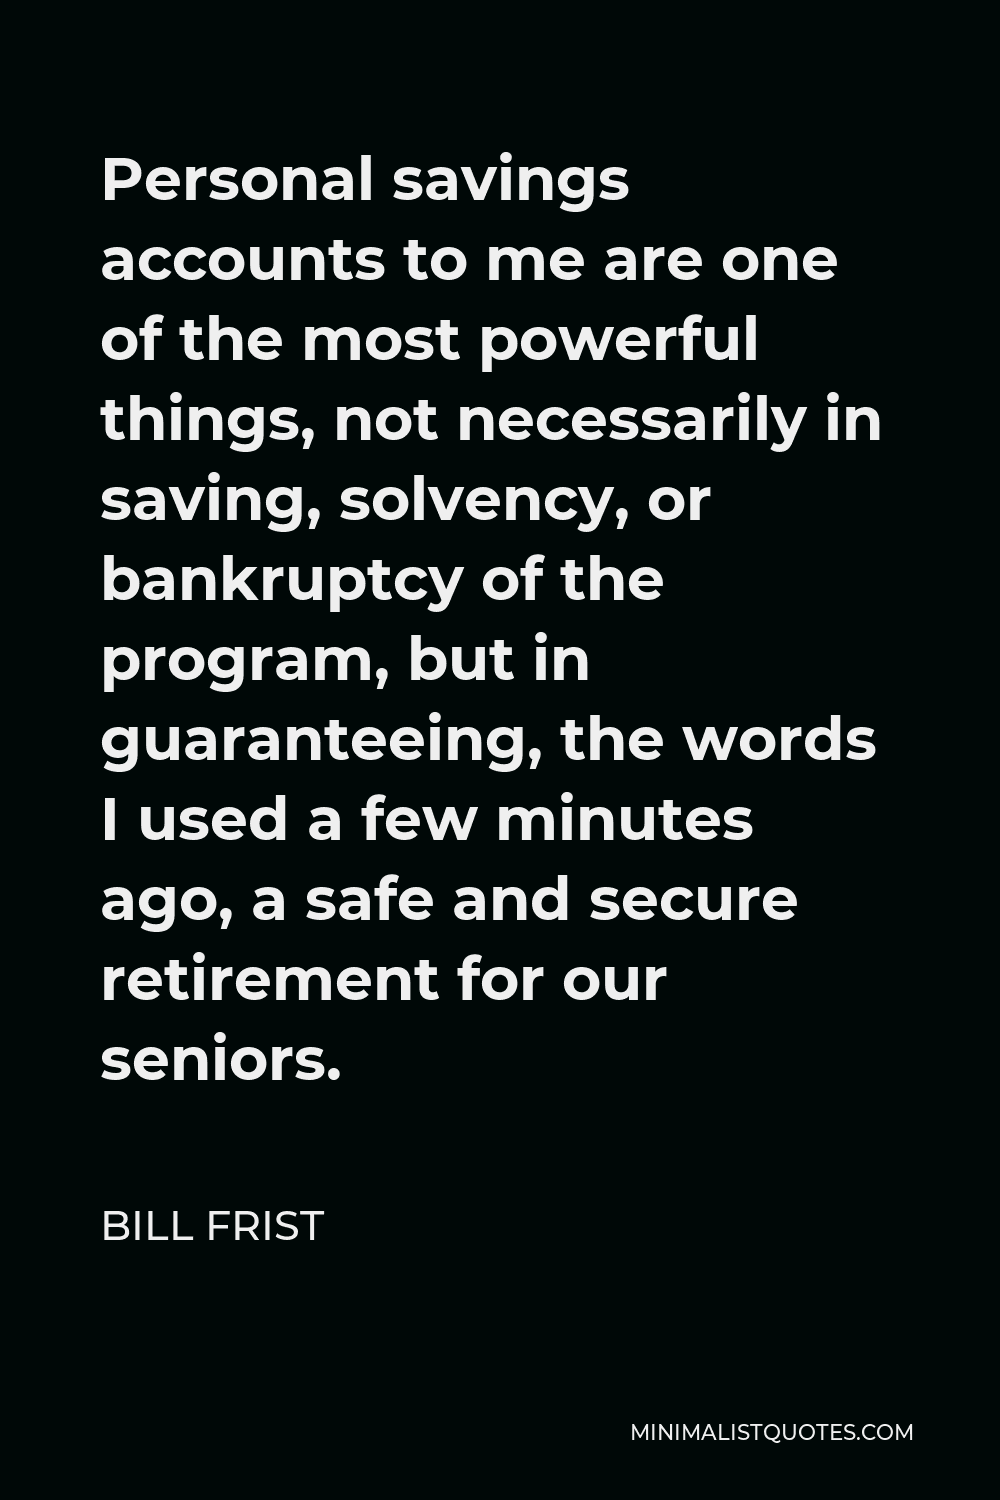 Bill Frist Quote - Personal savings accounts to me are one of the most powerful things, not necessarily in saving, solvency, or bankruptcy of the program, but in guaranteeing, the words I used a few minutes ago, a safe and secure retirement for our seniors.